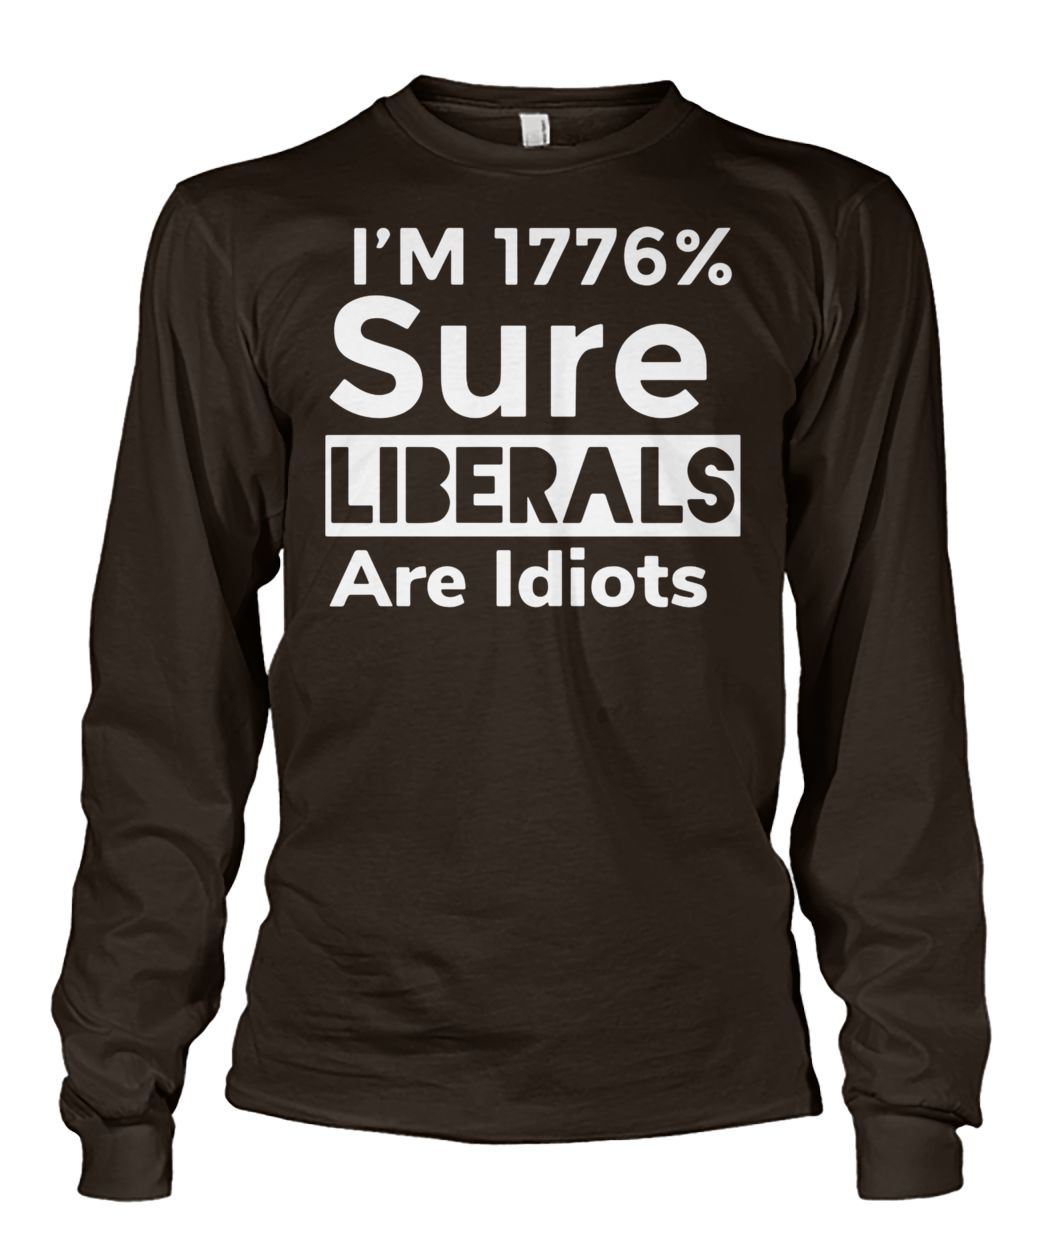 Official I'm 1776% sure liberals are idiots unisex long sleeve